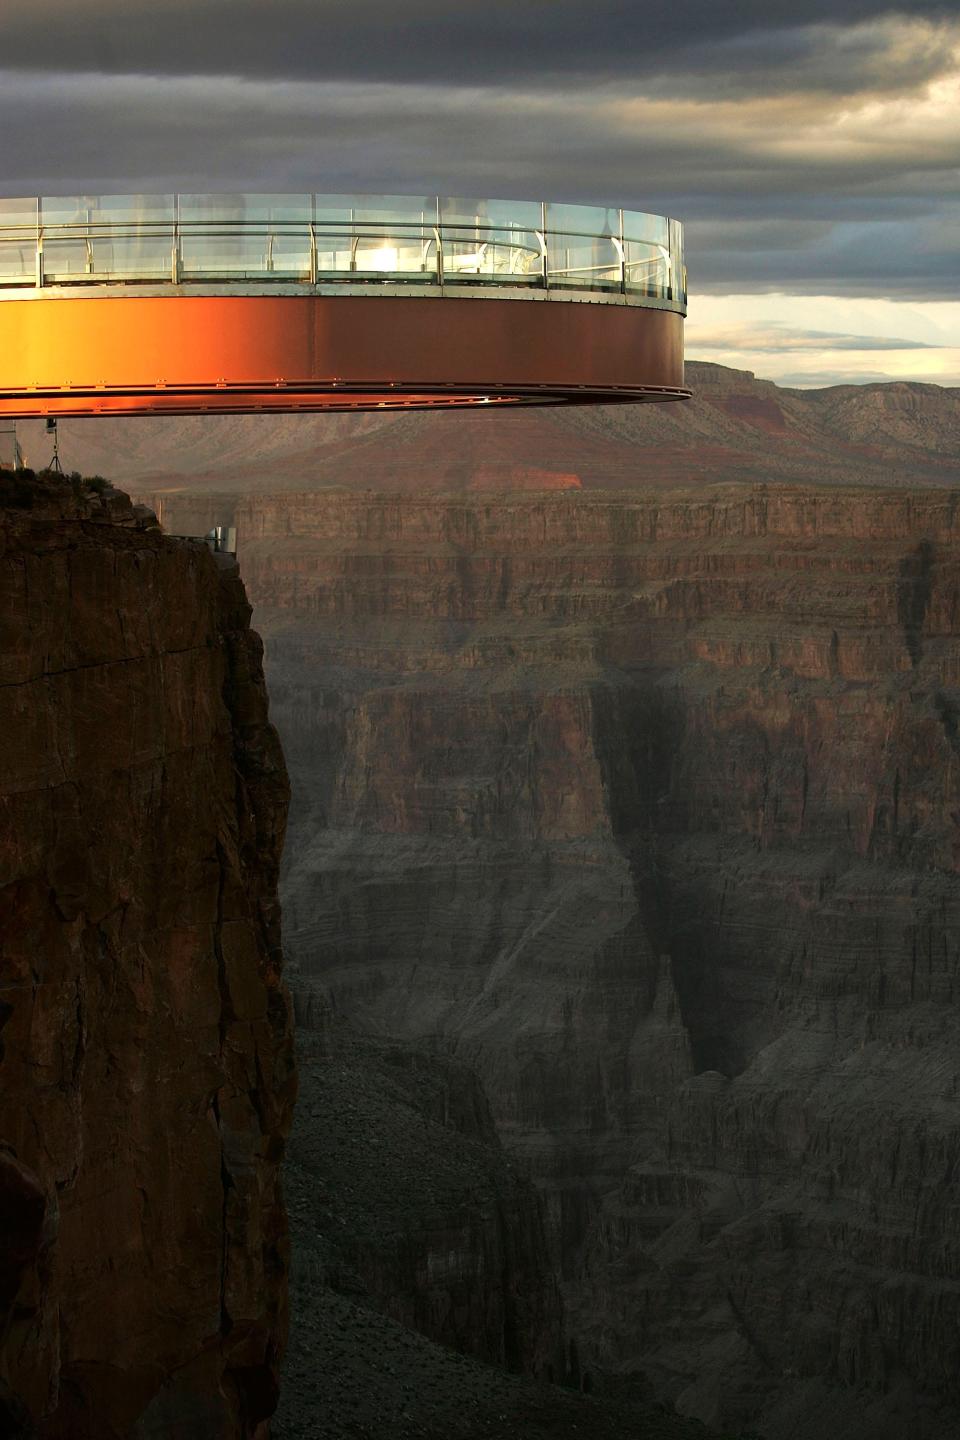 In this March 2007 file photo, the sun set on the Skywalk, the cantilevered glass walkway extending from the western Grand Canyon's rim over the Colorado River, on the Hualapai Reservation. The construction of the Skywalk on Hualapai Indian tribal land, 90 miles downstream from Grand Canyon National Park, stirred controversy with some tribal elders and environmentalists who condemned it as a desecration of a sacred American landscape.